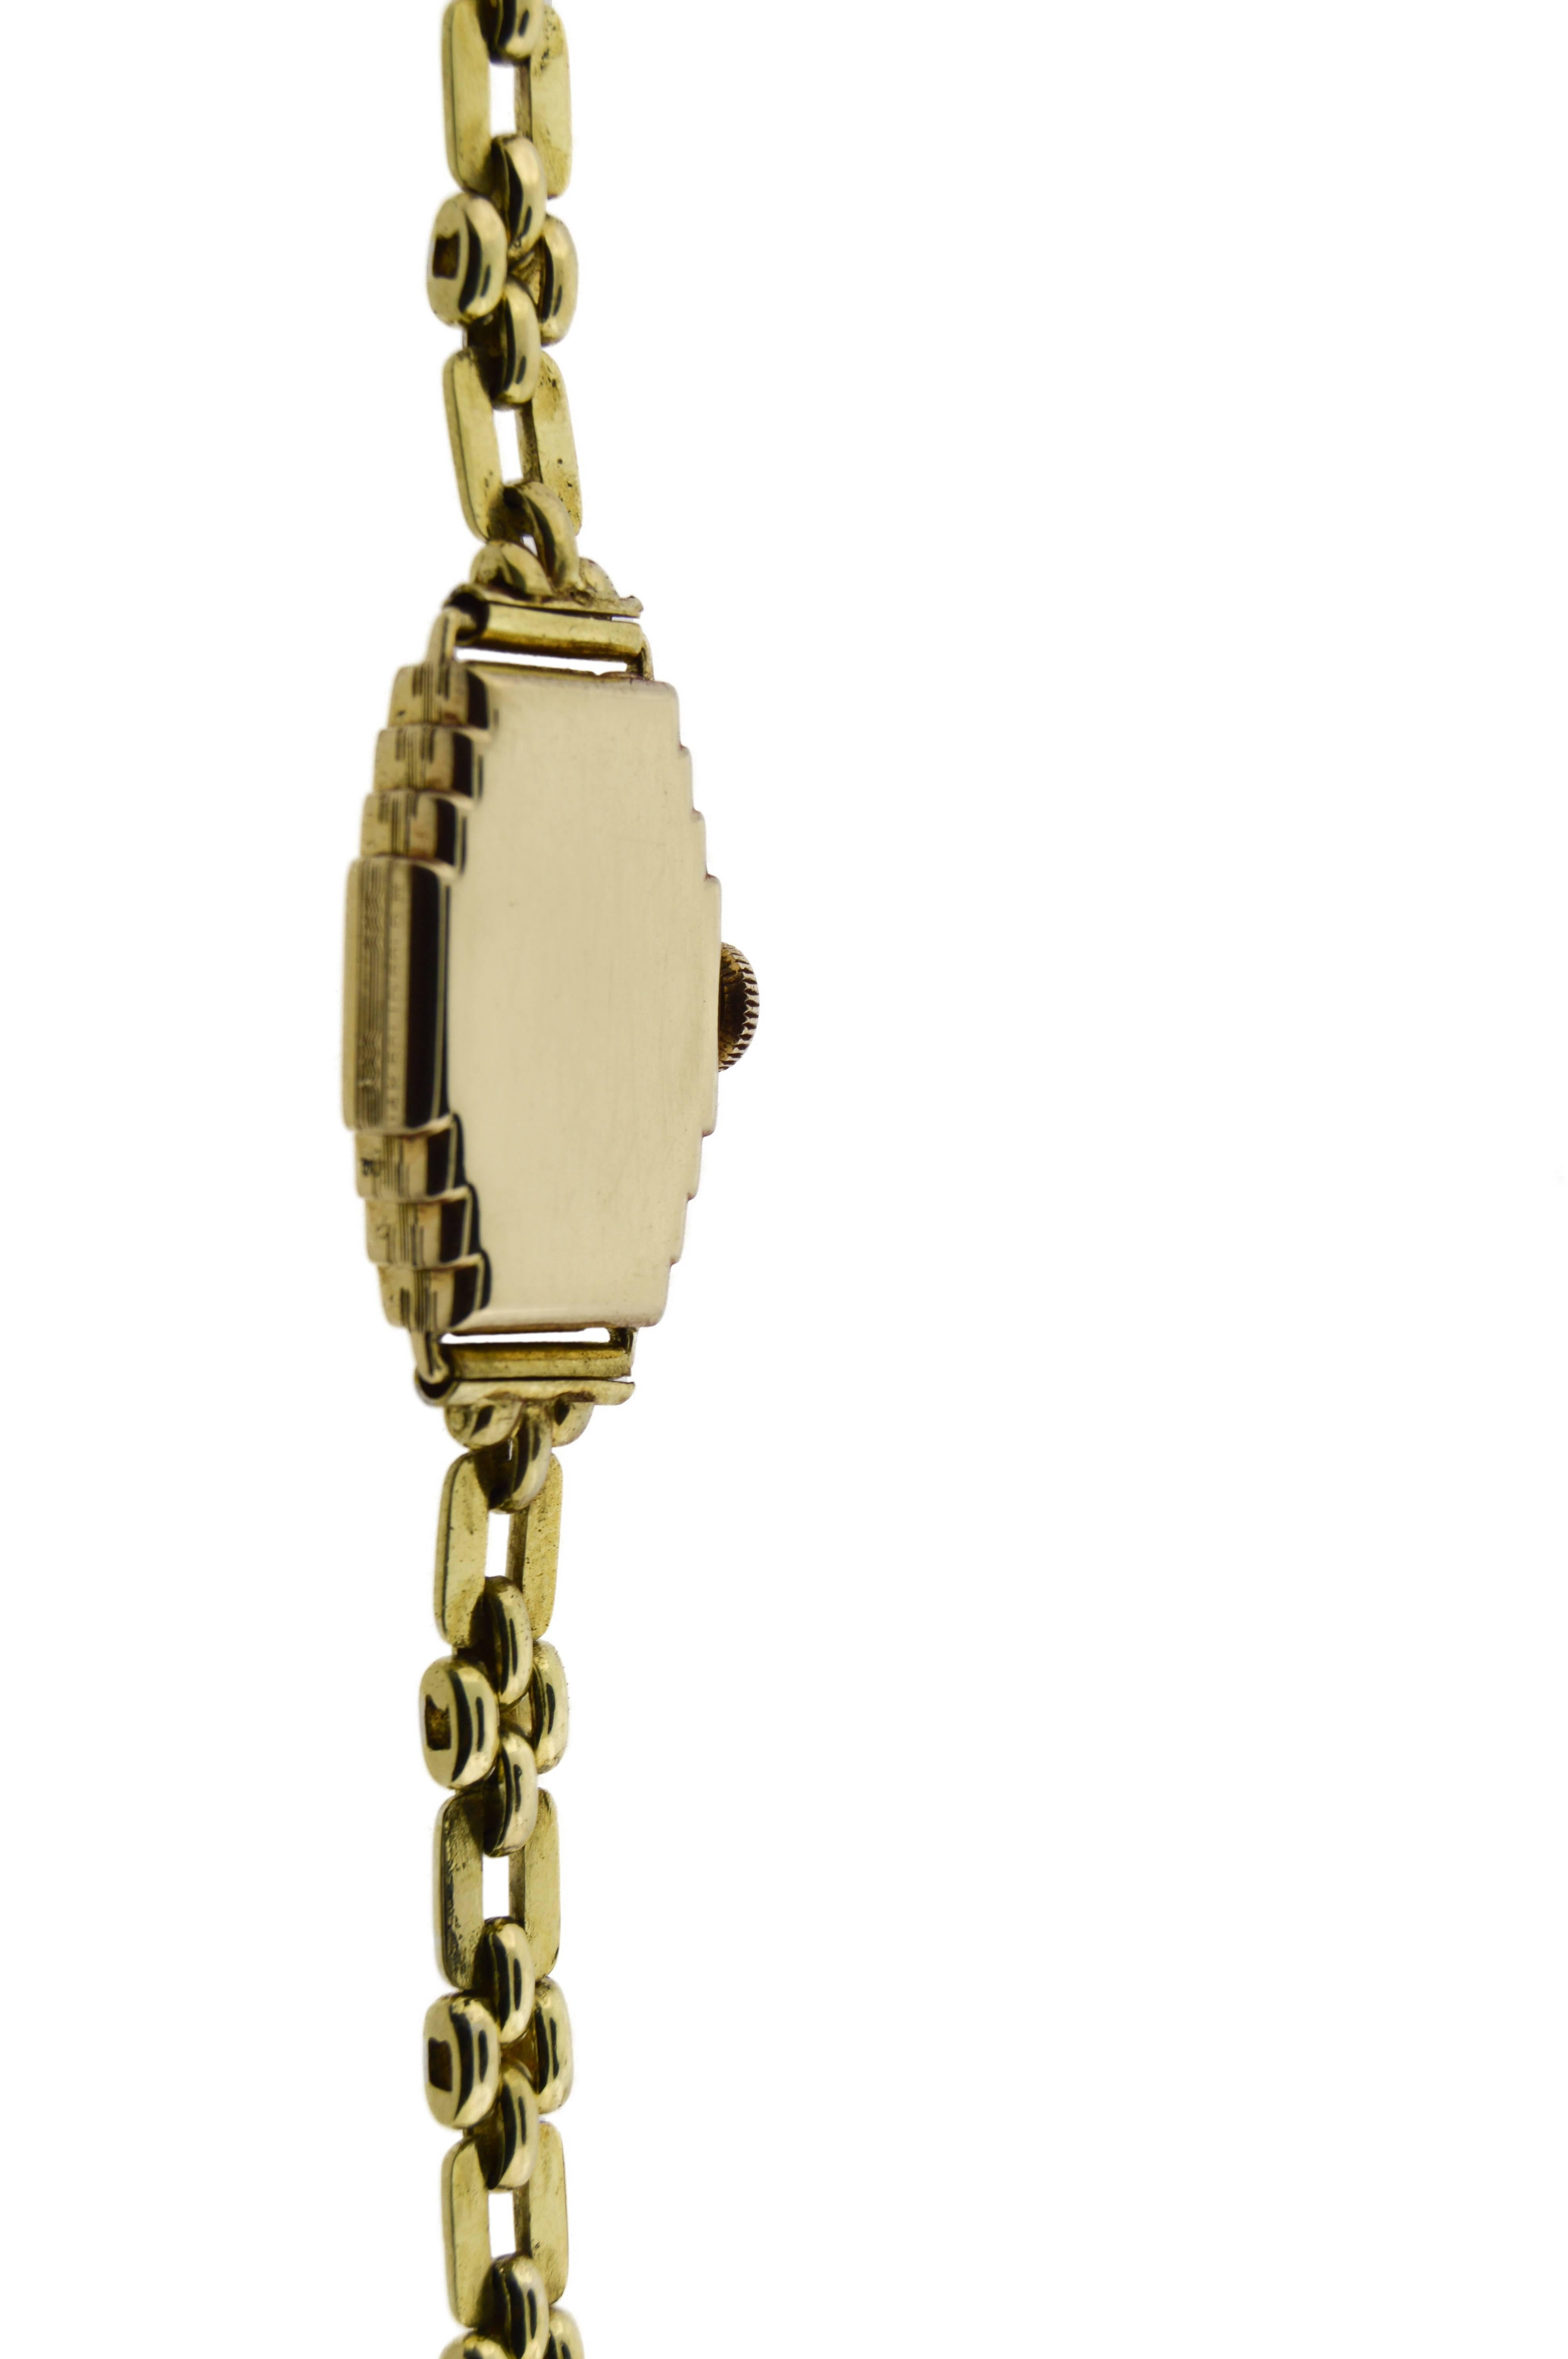 14kt solid gold ladies wrist watch with associated Art Deco gold filled bracelet. The bracelet is designed with unique safety catch. 17 jewel high quality movement made by the Elgin National Watch Company in Elgin, Illinois. This is a great looking